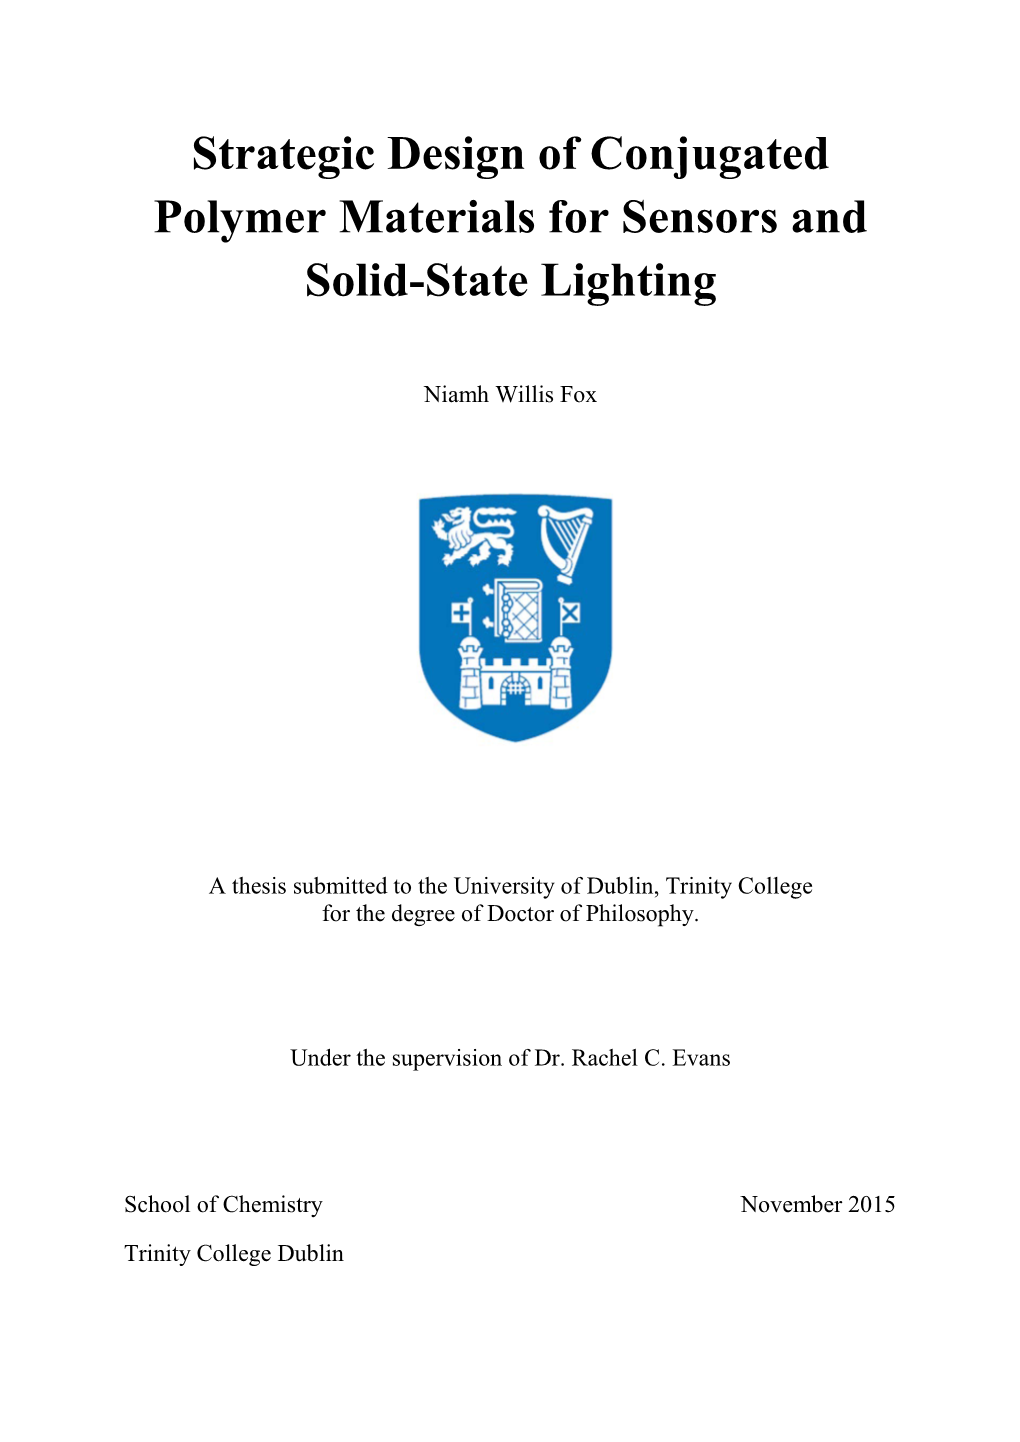 Strategic Design of Conjugated Polymer Materials for Sensors and Solid-State Lighting